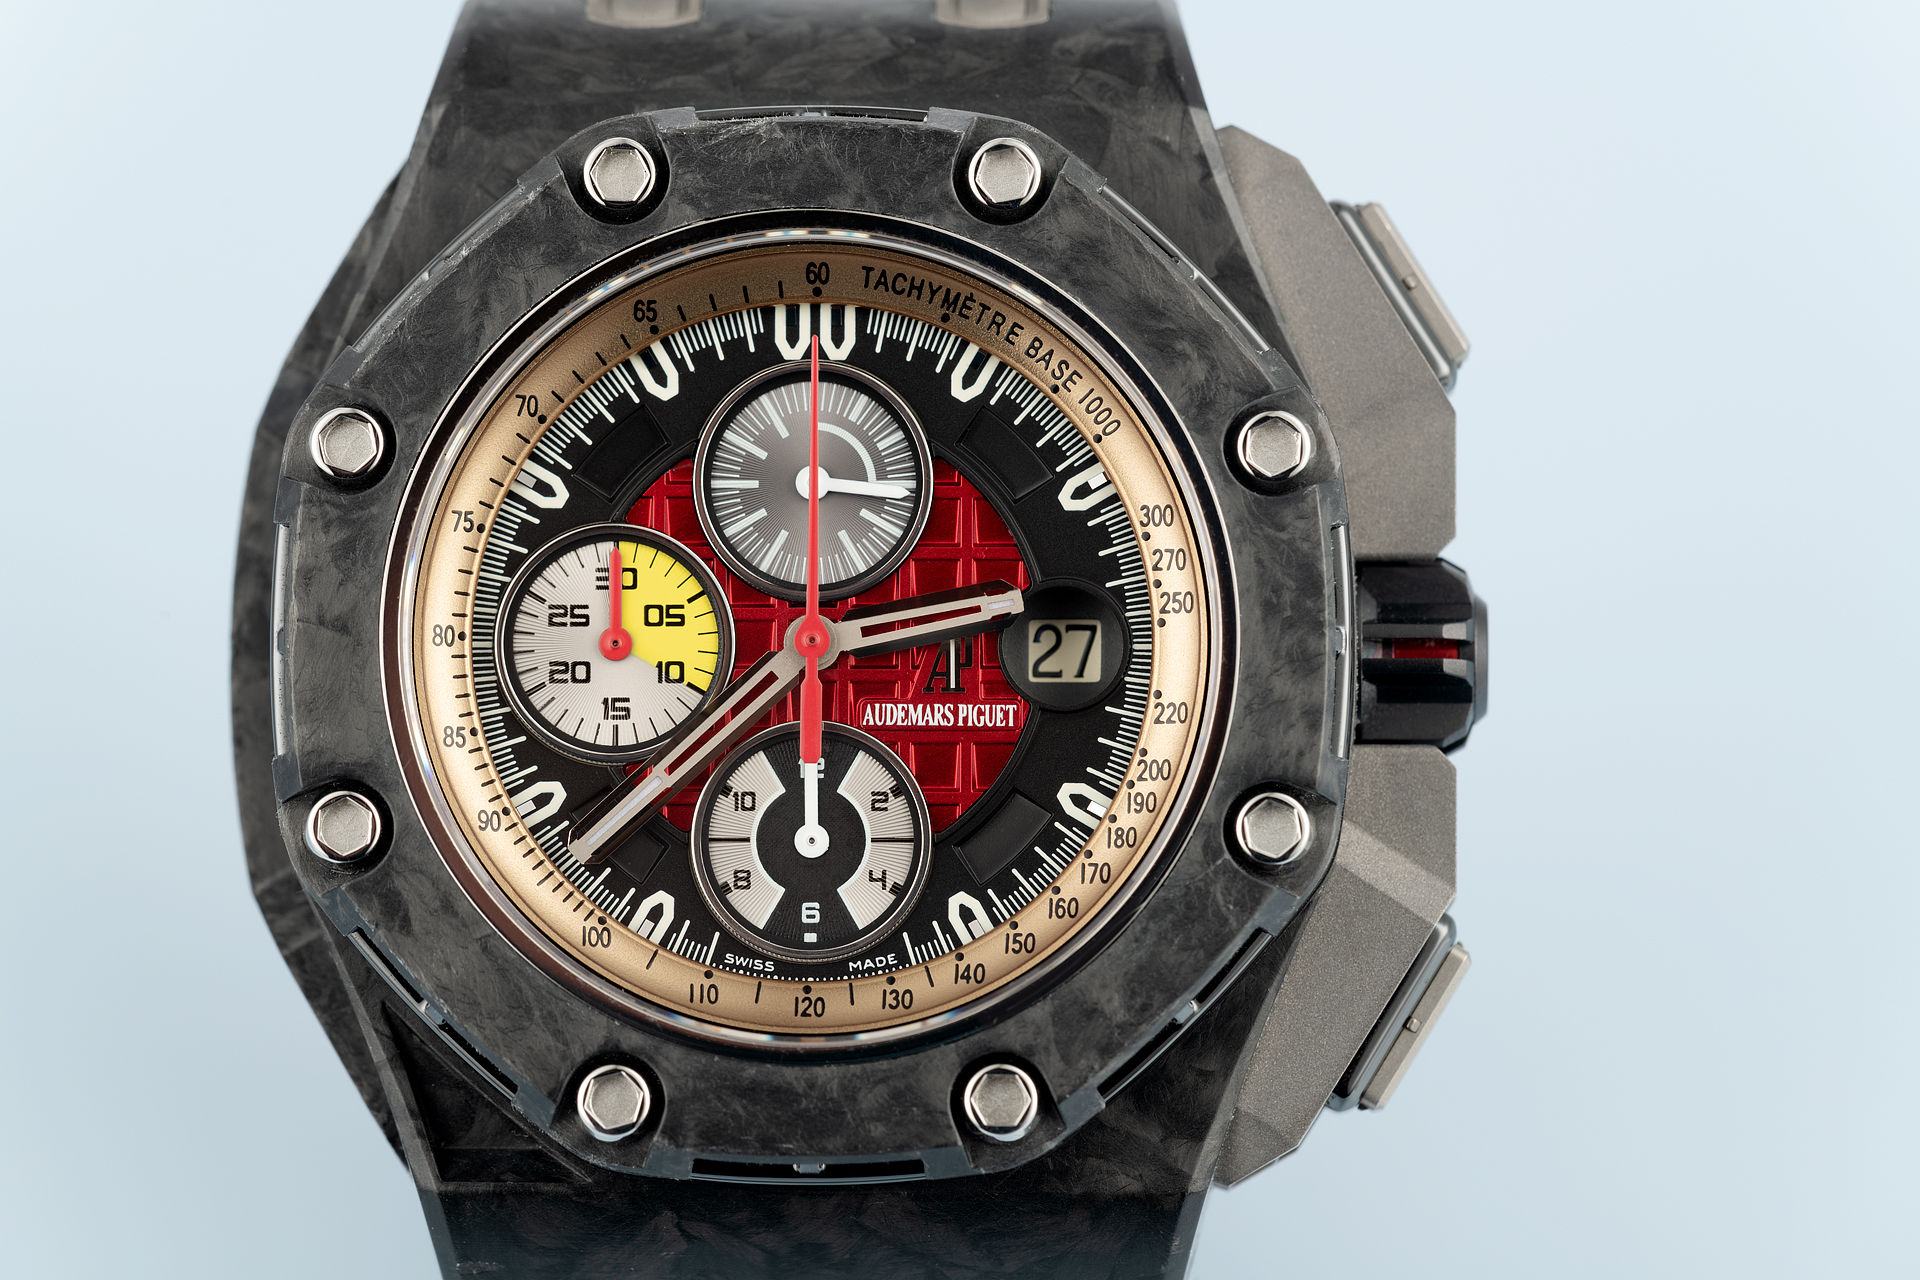 Limited Edition "Forged Carbon" | ref 26290IO.OO.A001VE.01 | Audemars Piguet Offshore Grand Prix